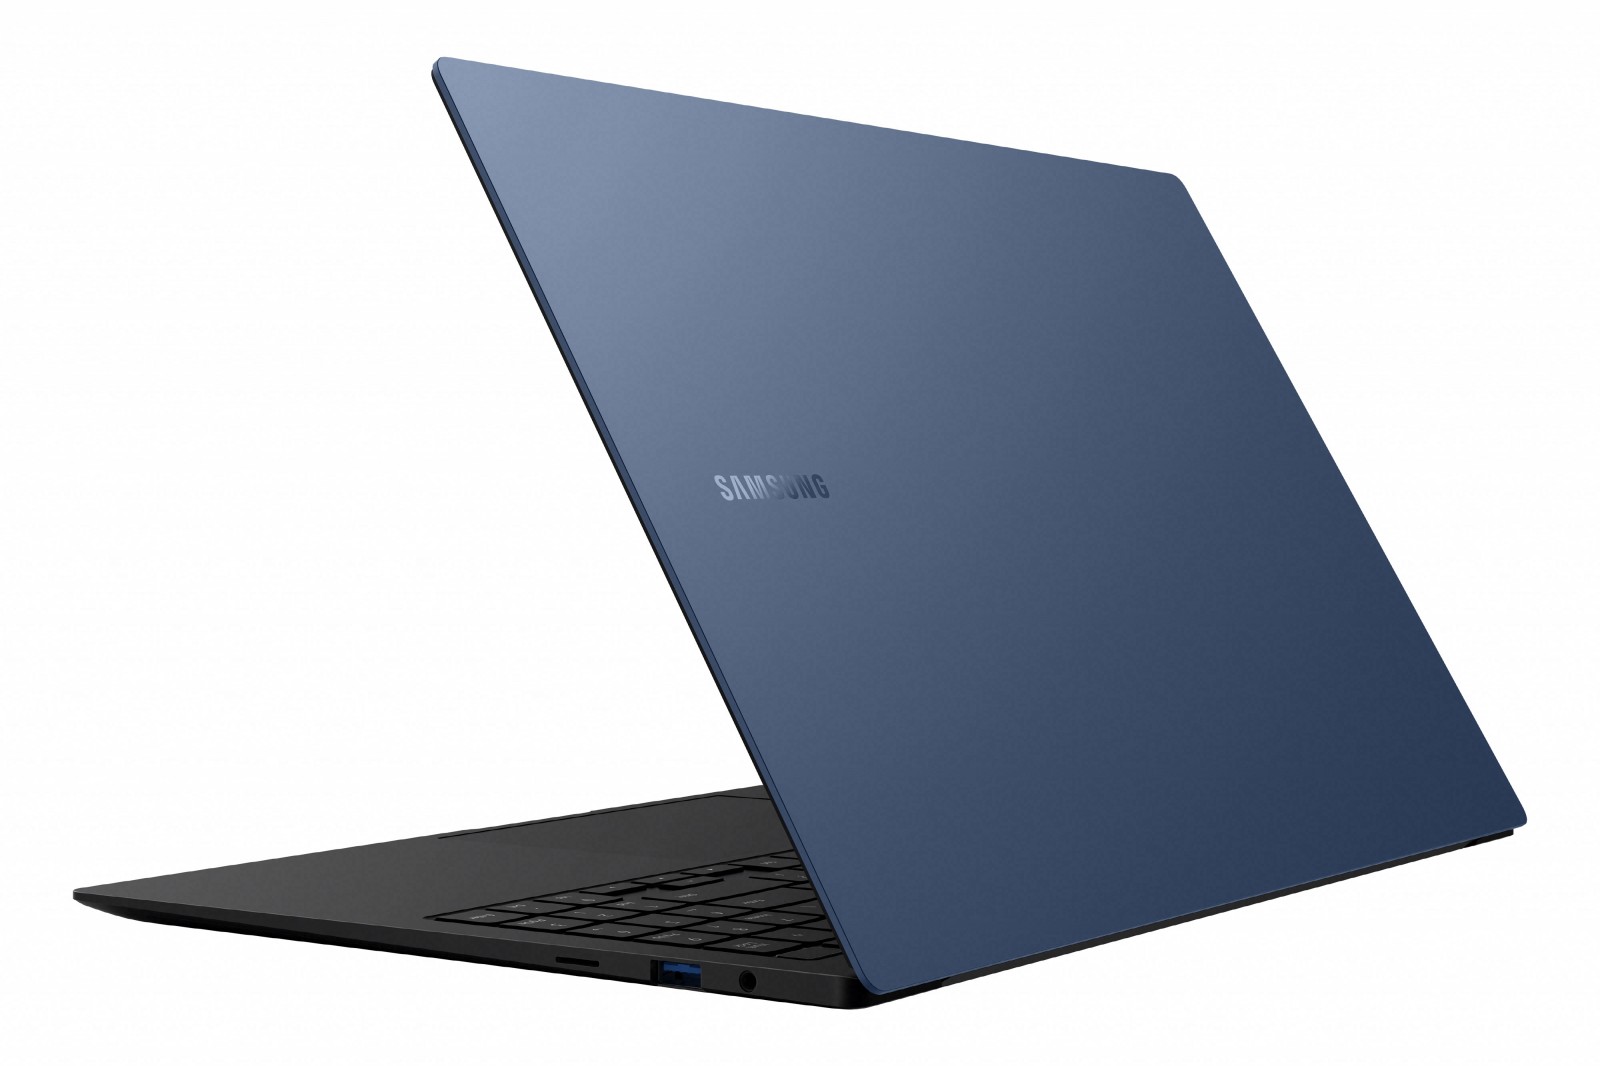 Samsung Unveils 4 New Galaxy Book Laptops Starting From €680